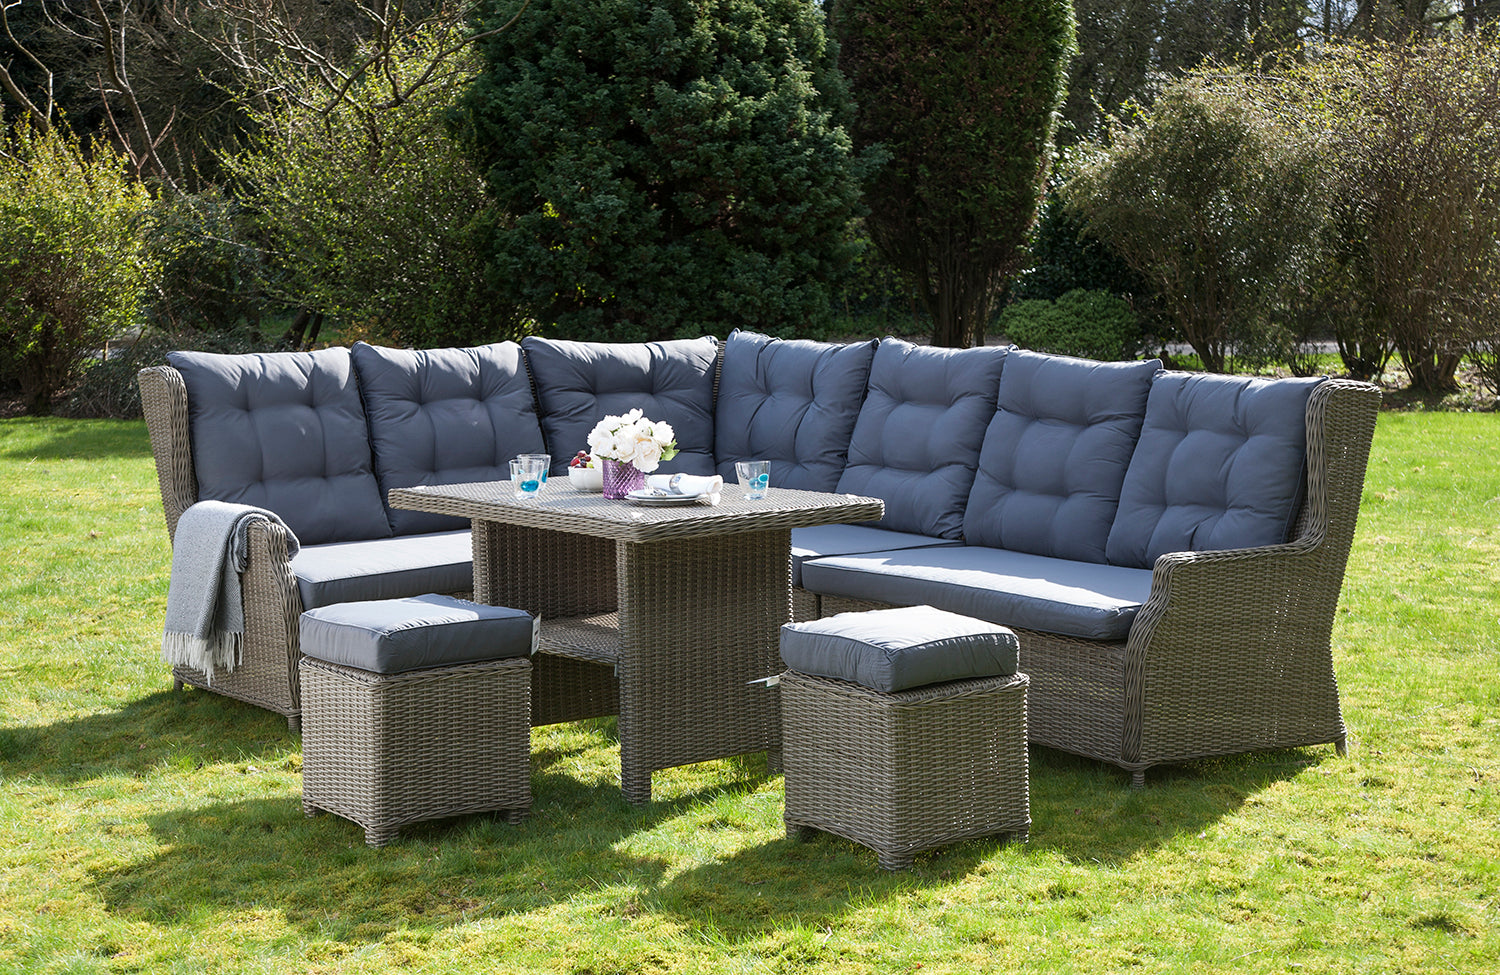 Rattan Garden Furniture for outdoor use or can be used for indoor Conservatory furniture